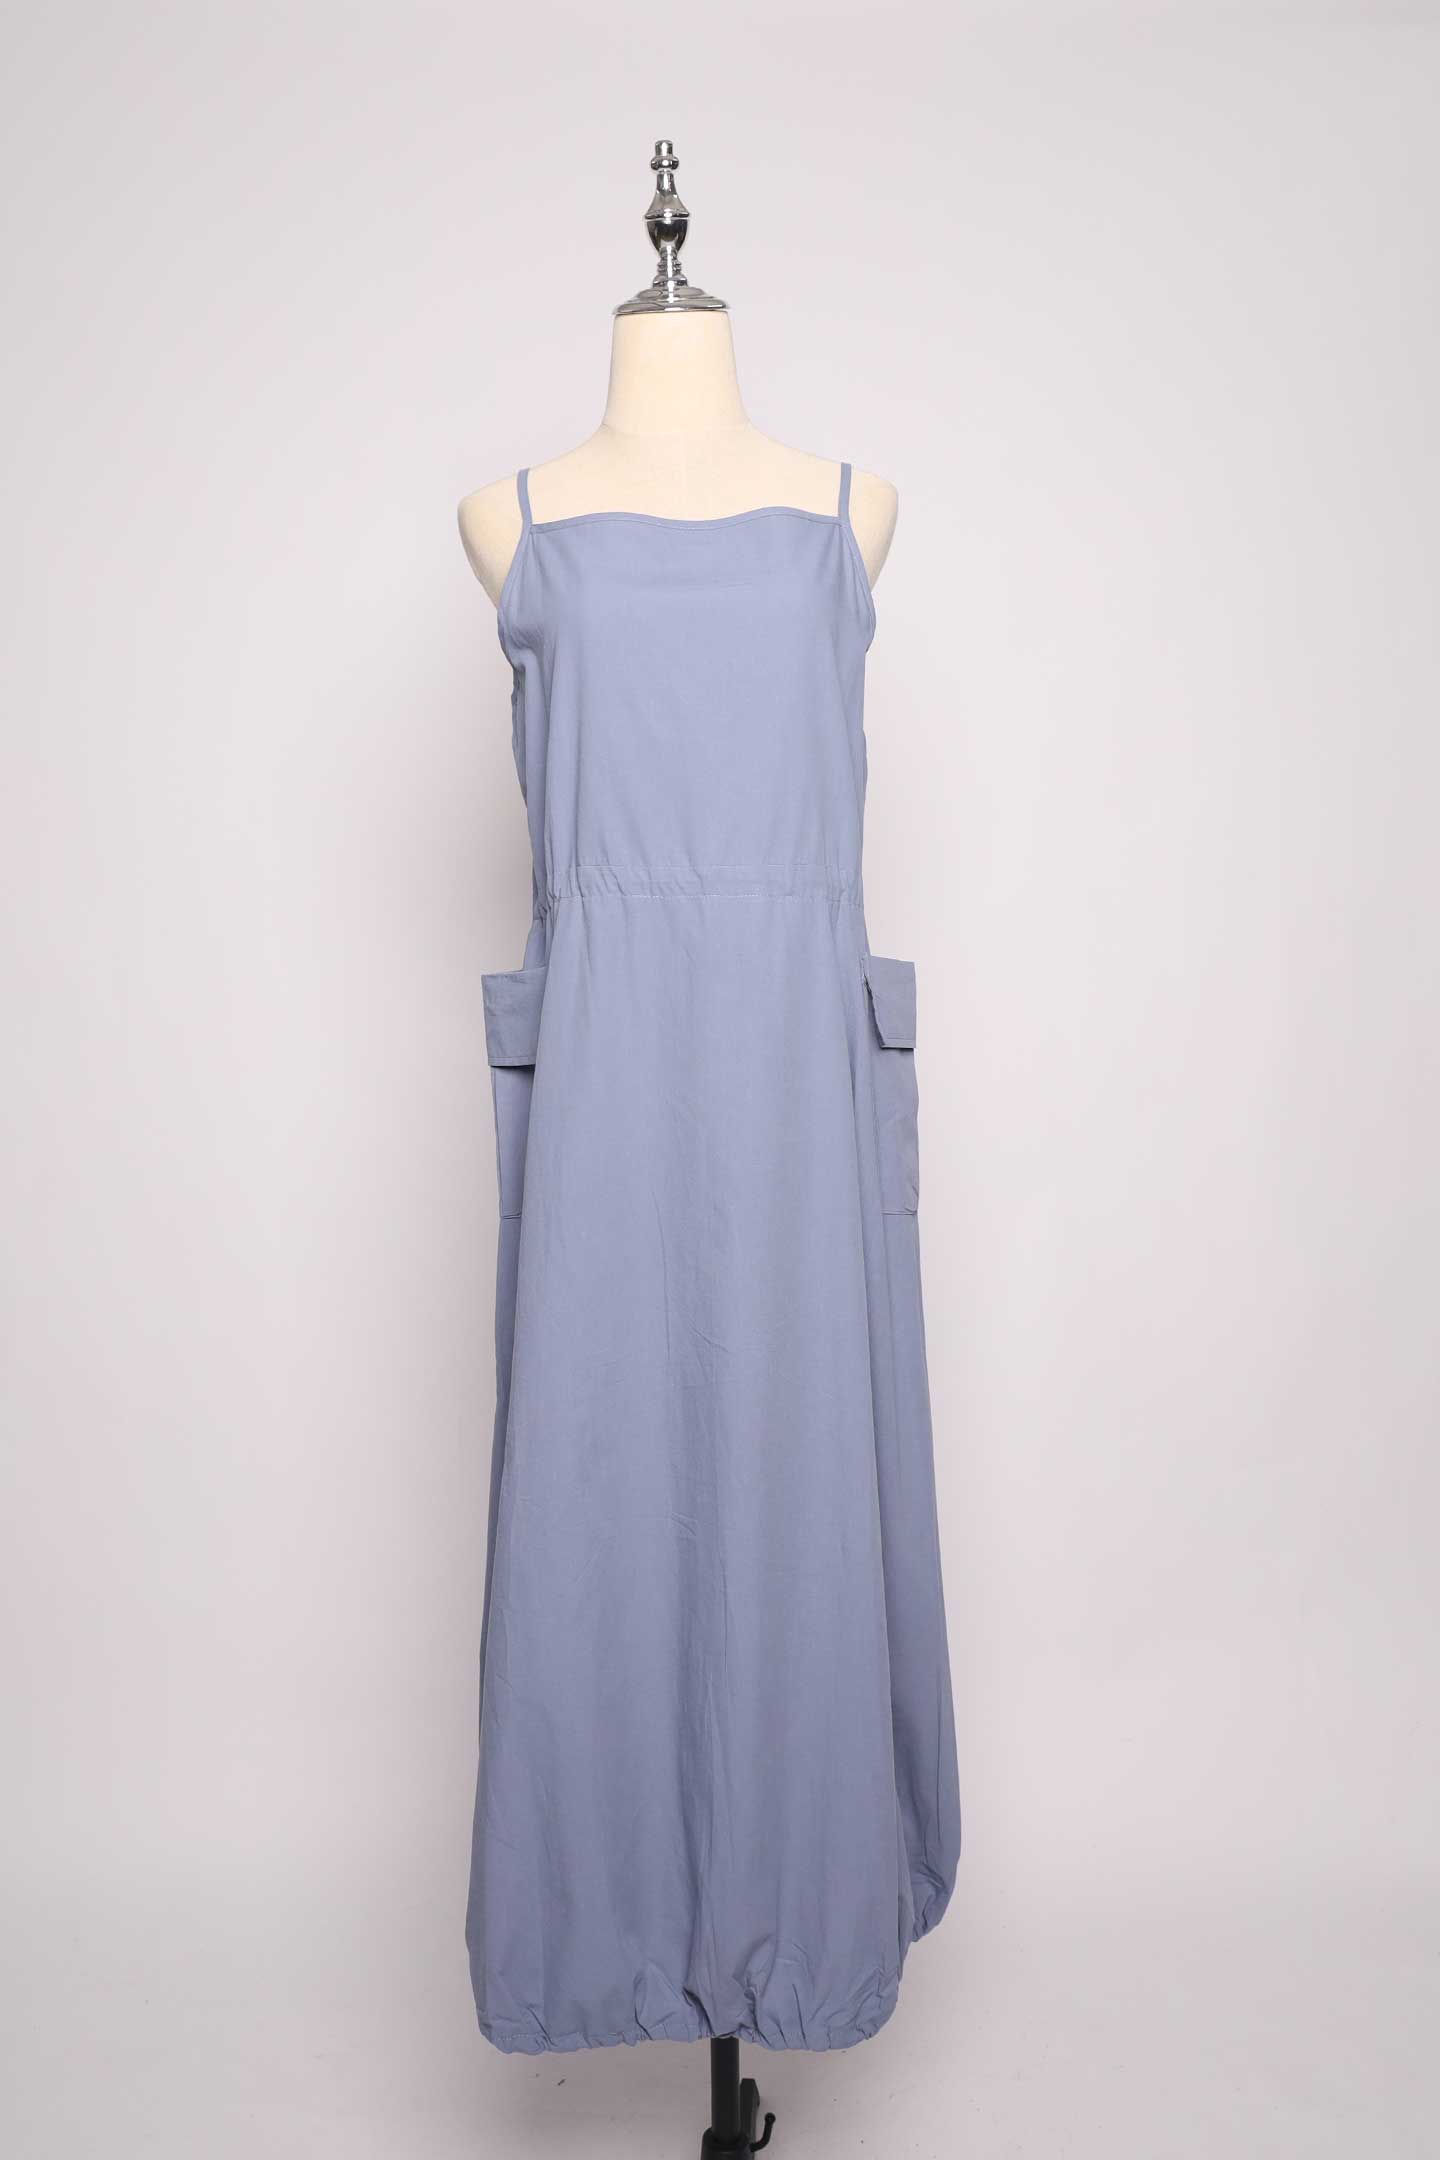 PO - Bailey Pinafore Dress in Blue